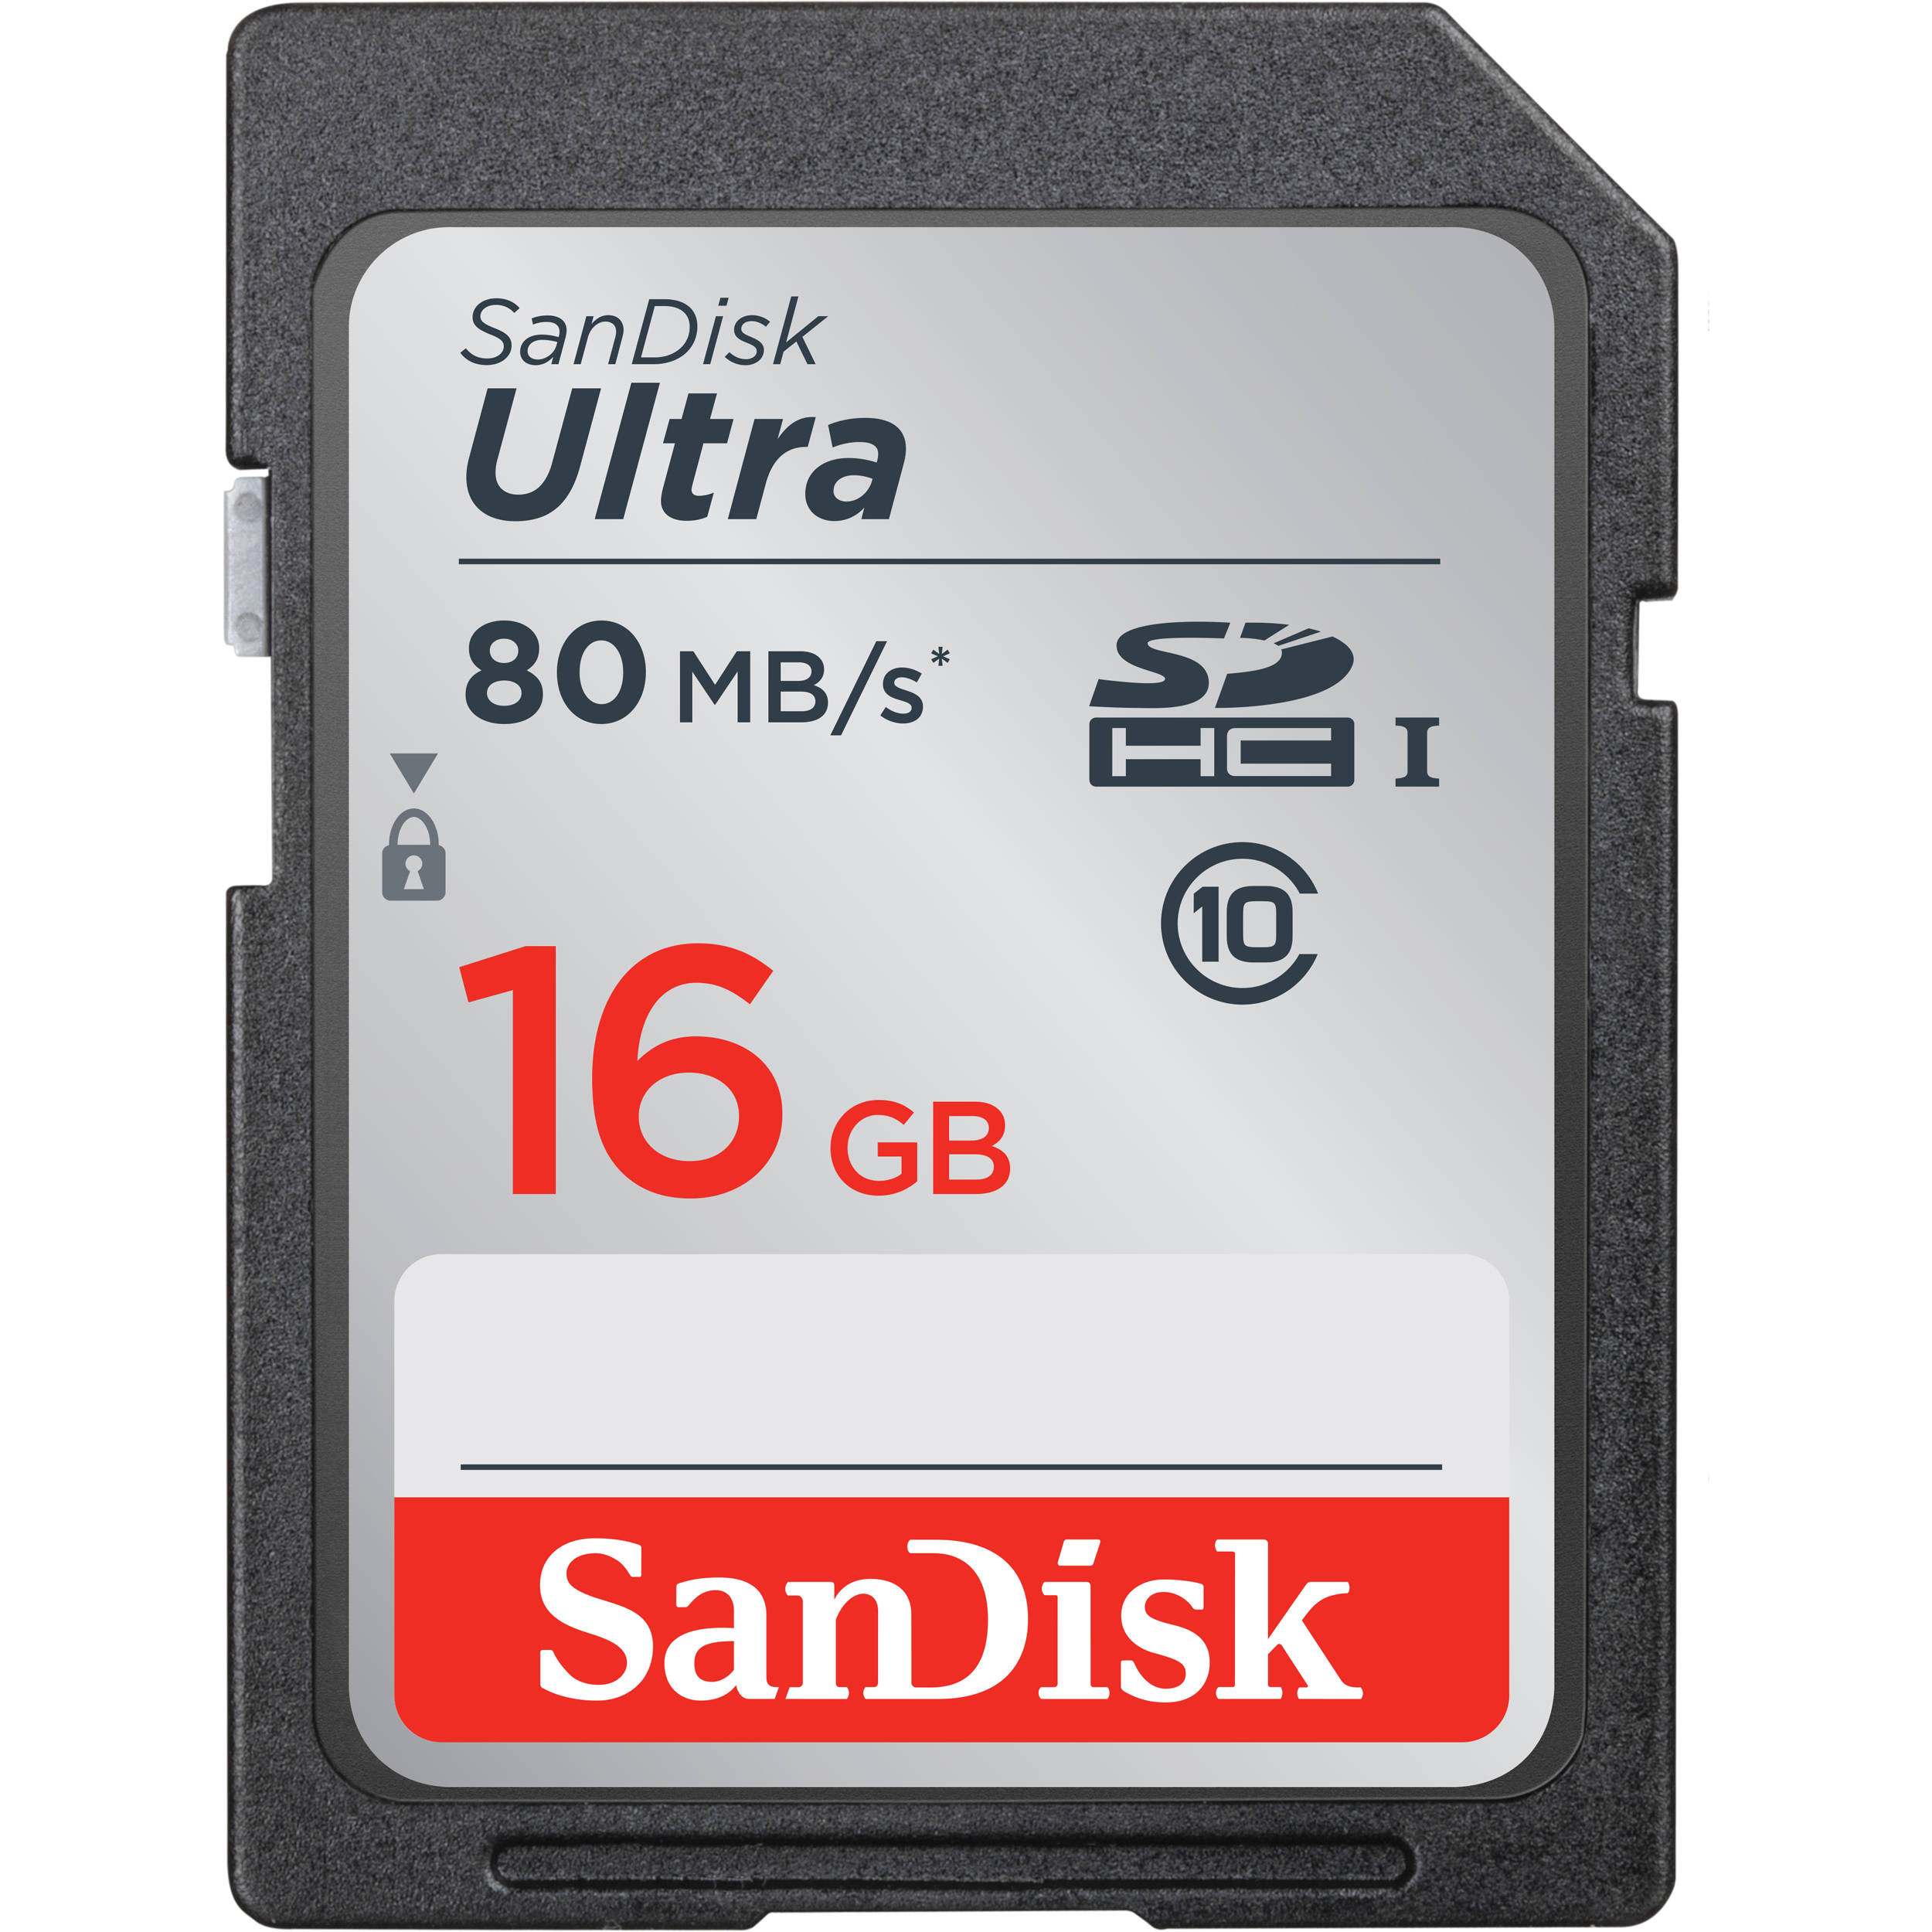 SanDisk SDHC 16GB Ultra 48MBs Class 10 UHS-I